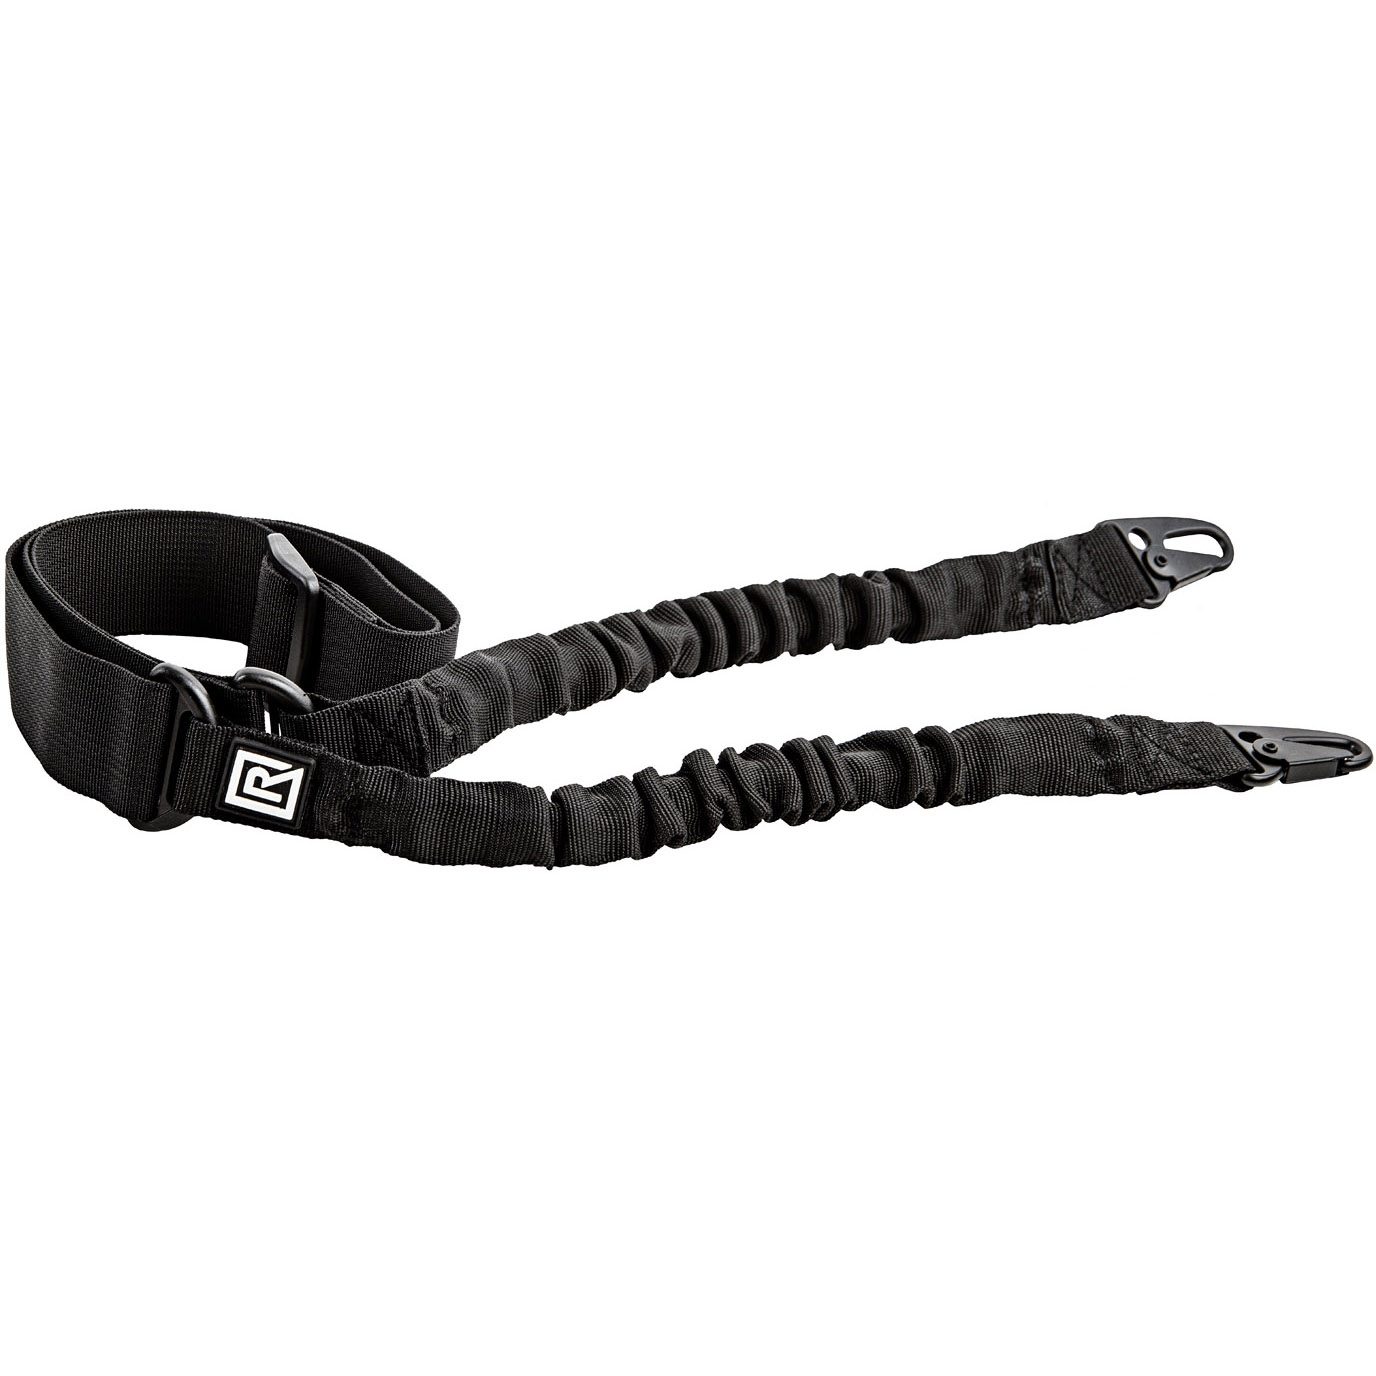 BlackRapid Dual Point Gun Sling Strap, Black with Clips